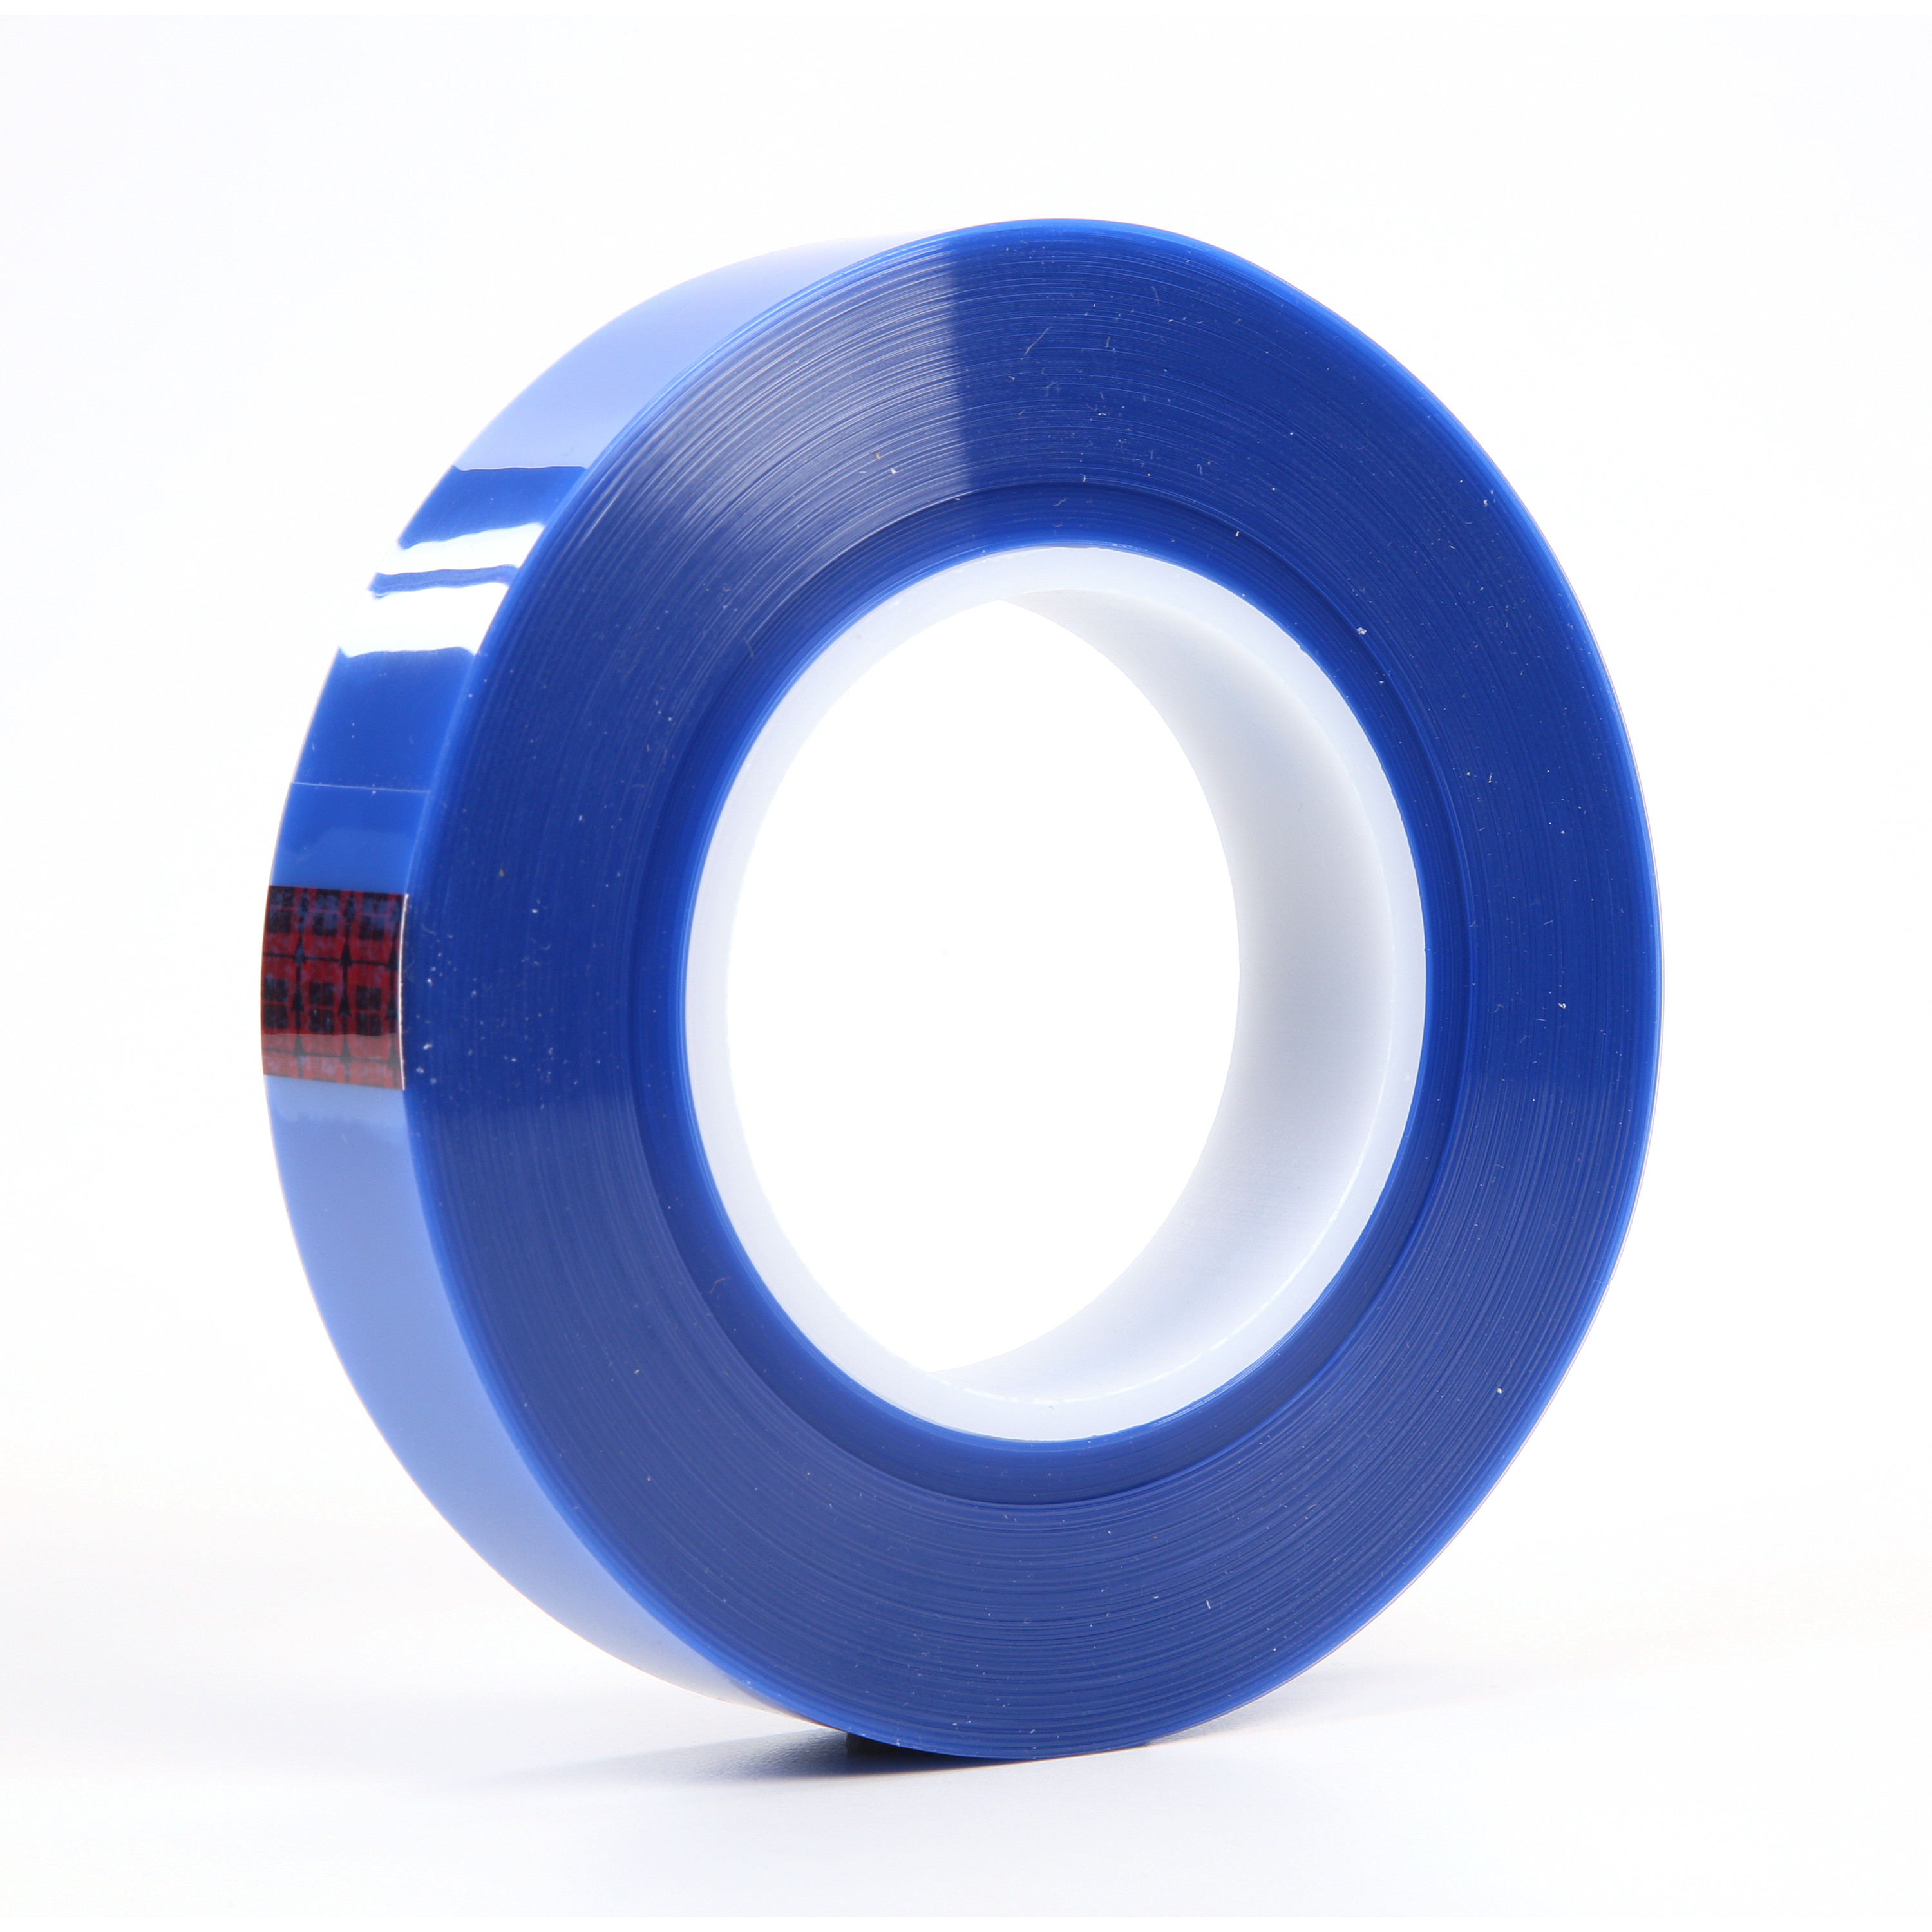 3M™ Polyester Tape 8905, Blue, 1 in x 72 yd, 6.4 mil, 36 rolls per case,
Plastic Core